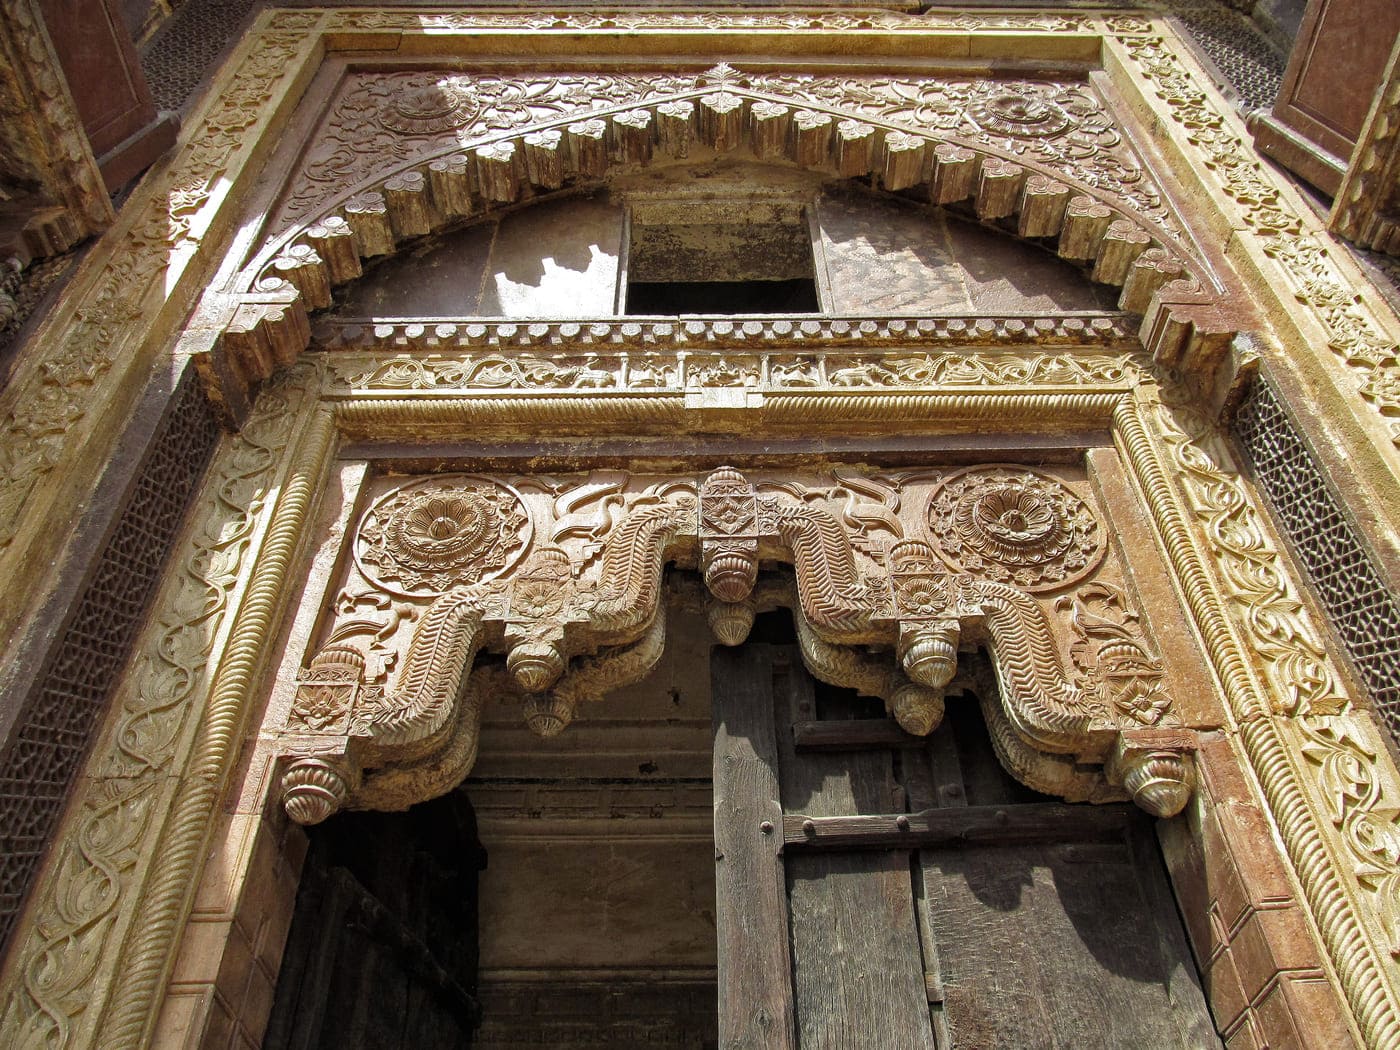 A close up view of the main entrance of the Jahangir Palace shows the detailed stone-carving artwork generally associated with Mughal decor but adapted by use of HIndu imagery and designs, Orchha 